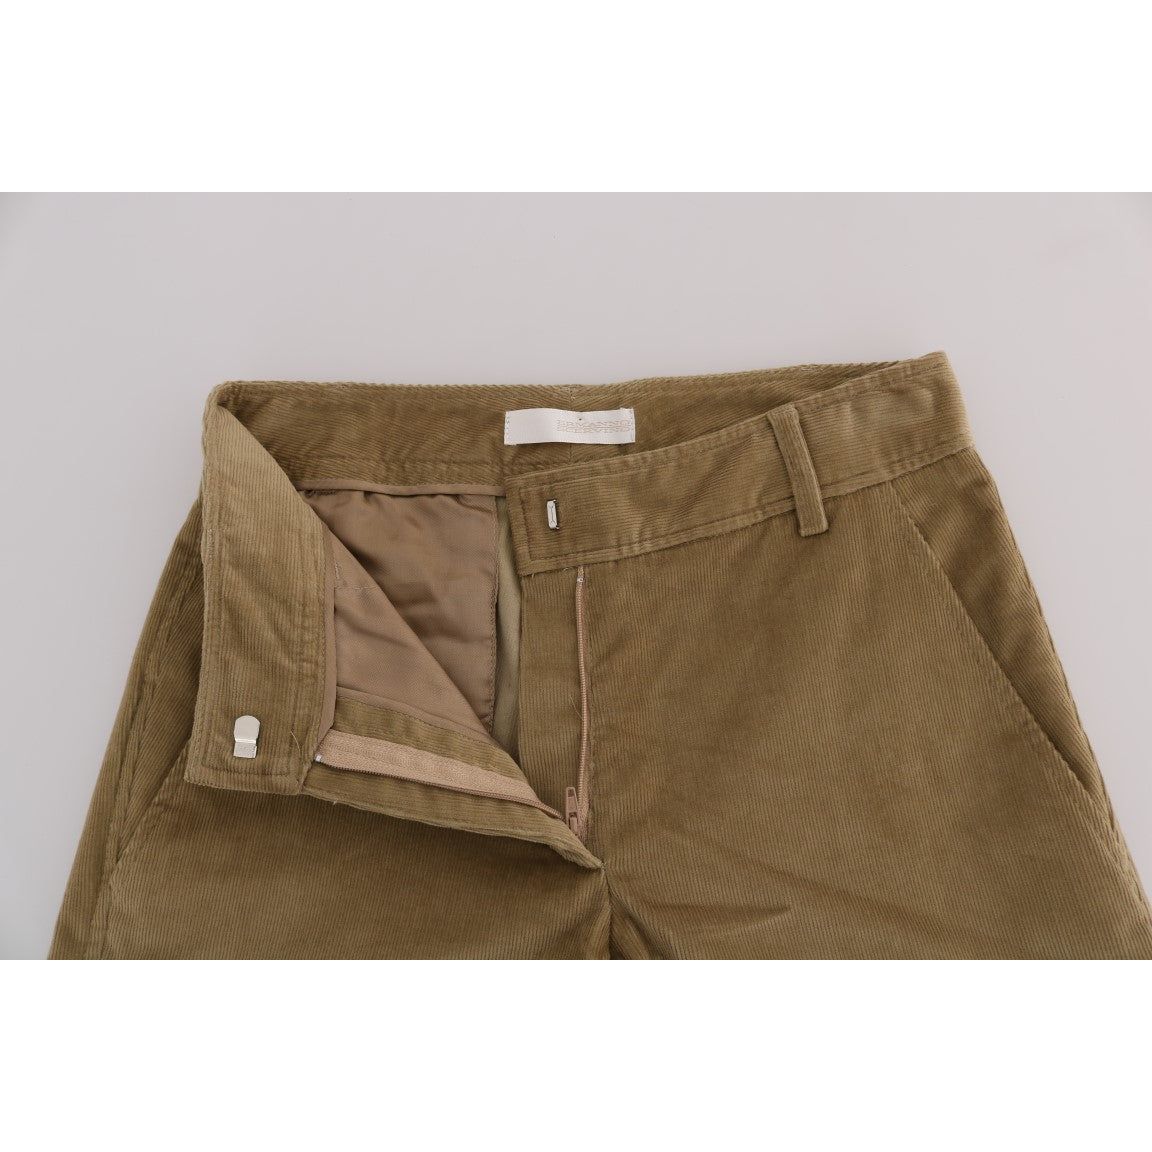 Ermanno Scervino Chic Beige Casual Pants for Sophisticated Style Jeans & Pants beige-cotton-corduroys-pants